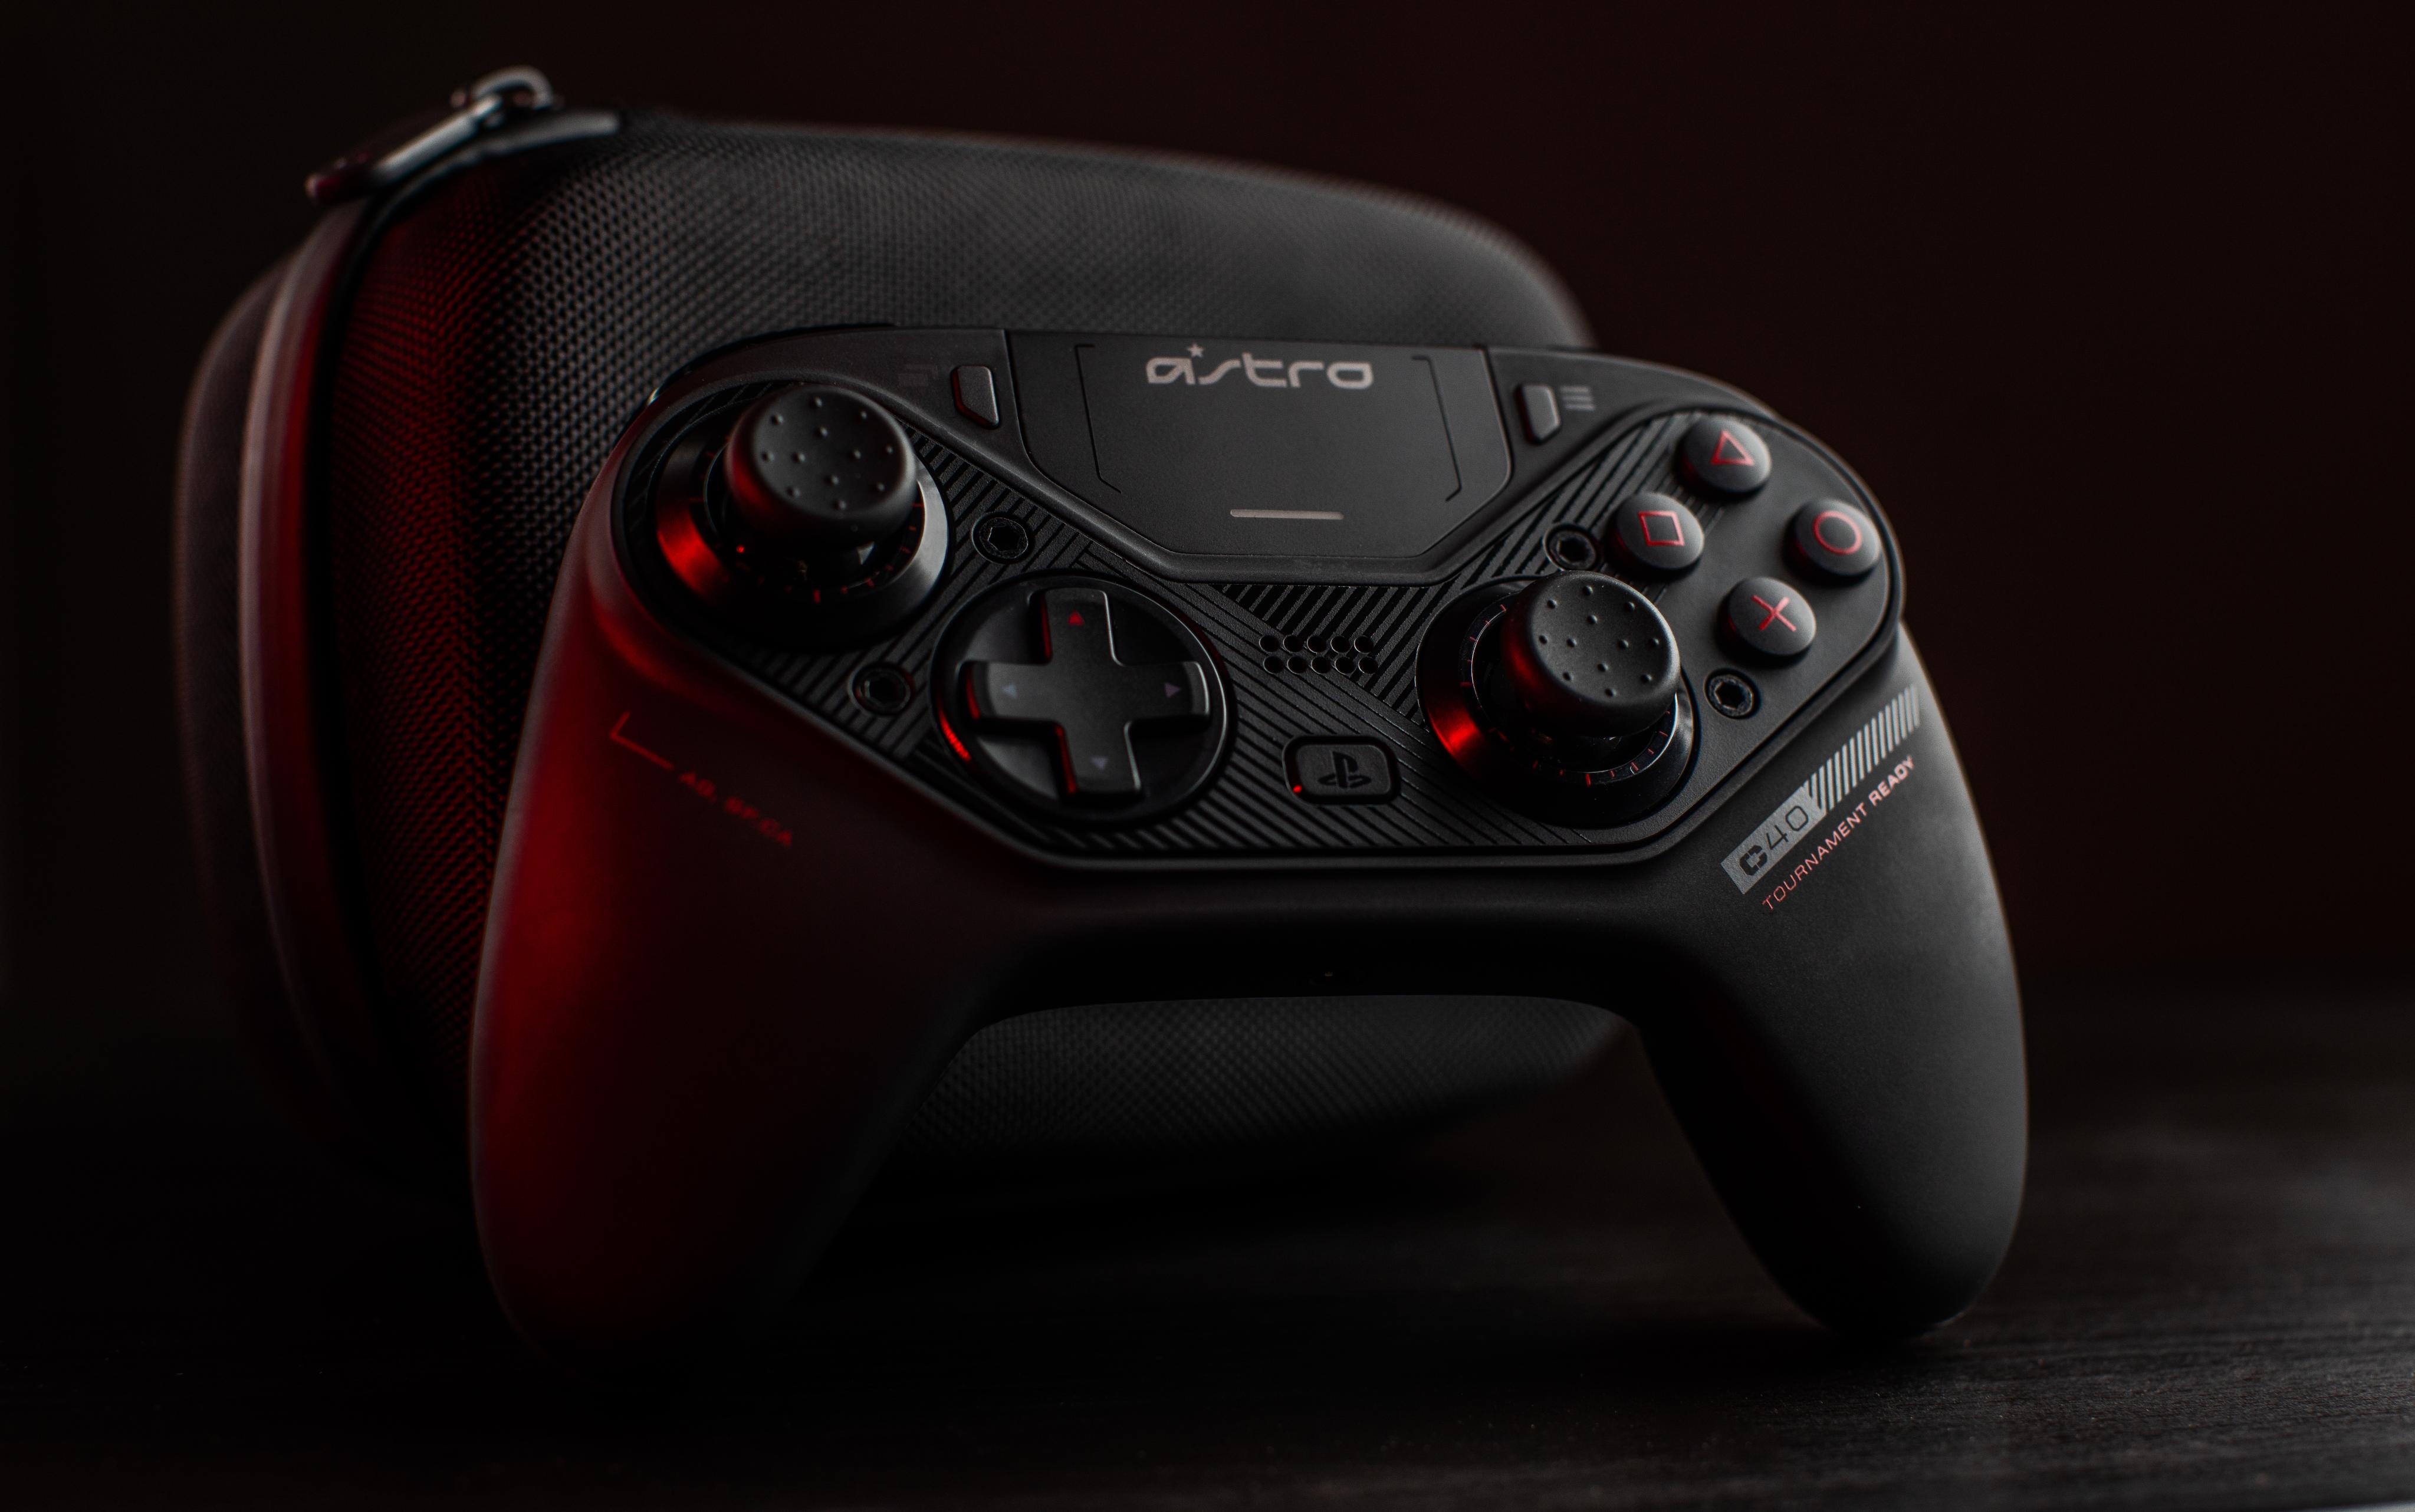 ASTRO Gaming on Twitter: "Sony has confirmed that the C40 TR Controller will work with supported PlayStation games on PlayStation 5, and DualShock 4 controllers + third party controllers, including